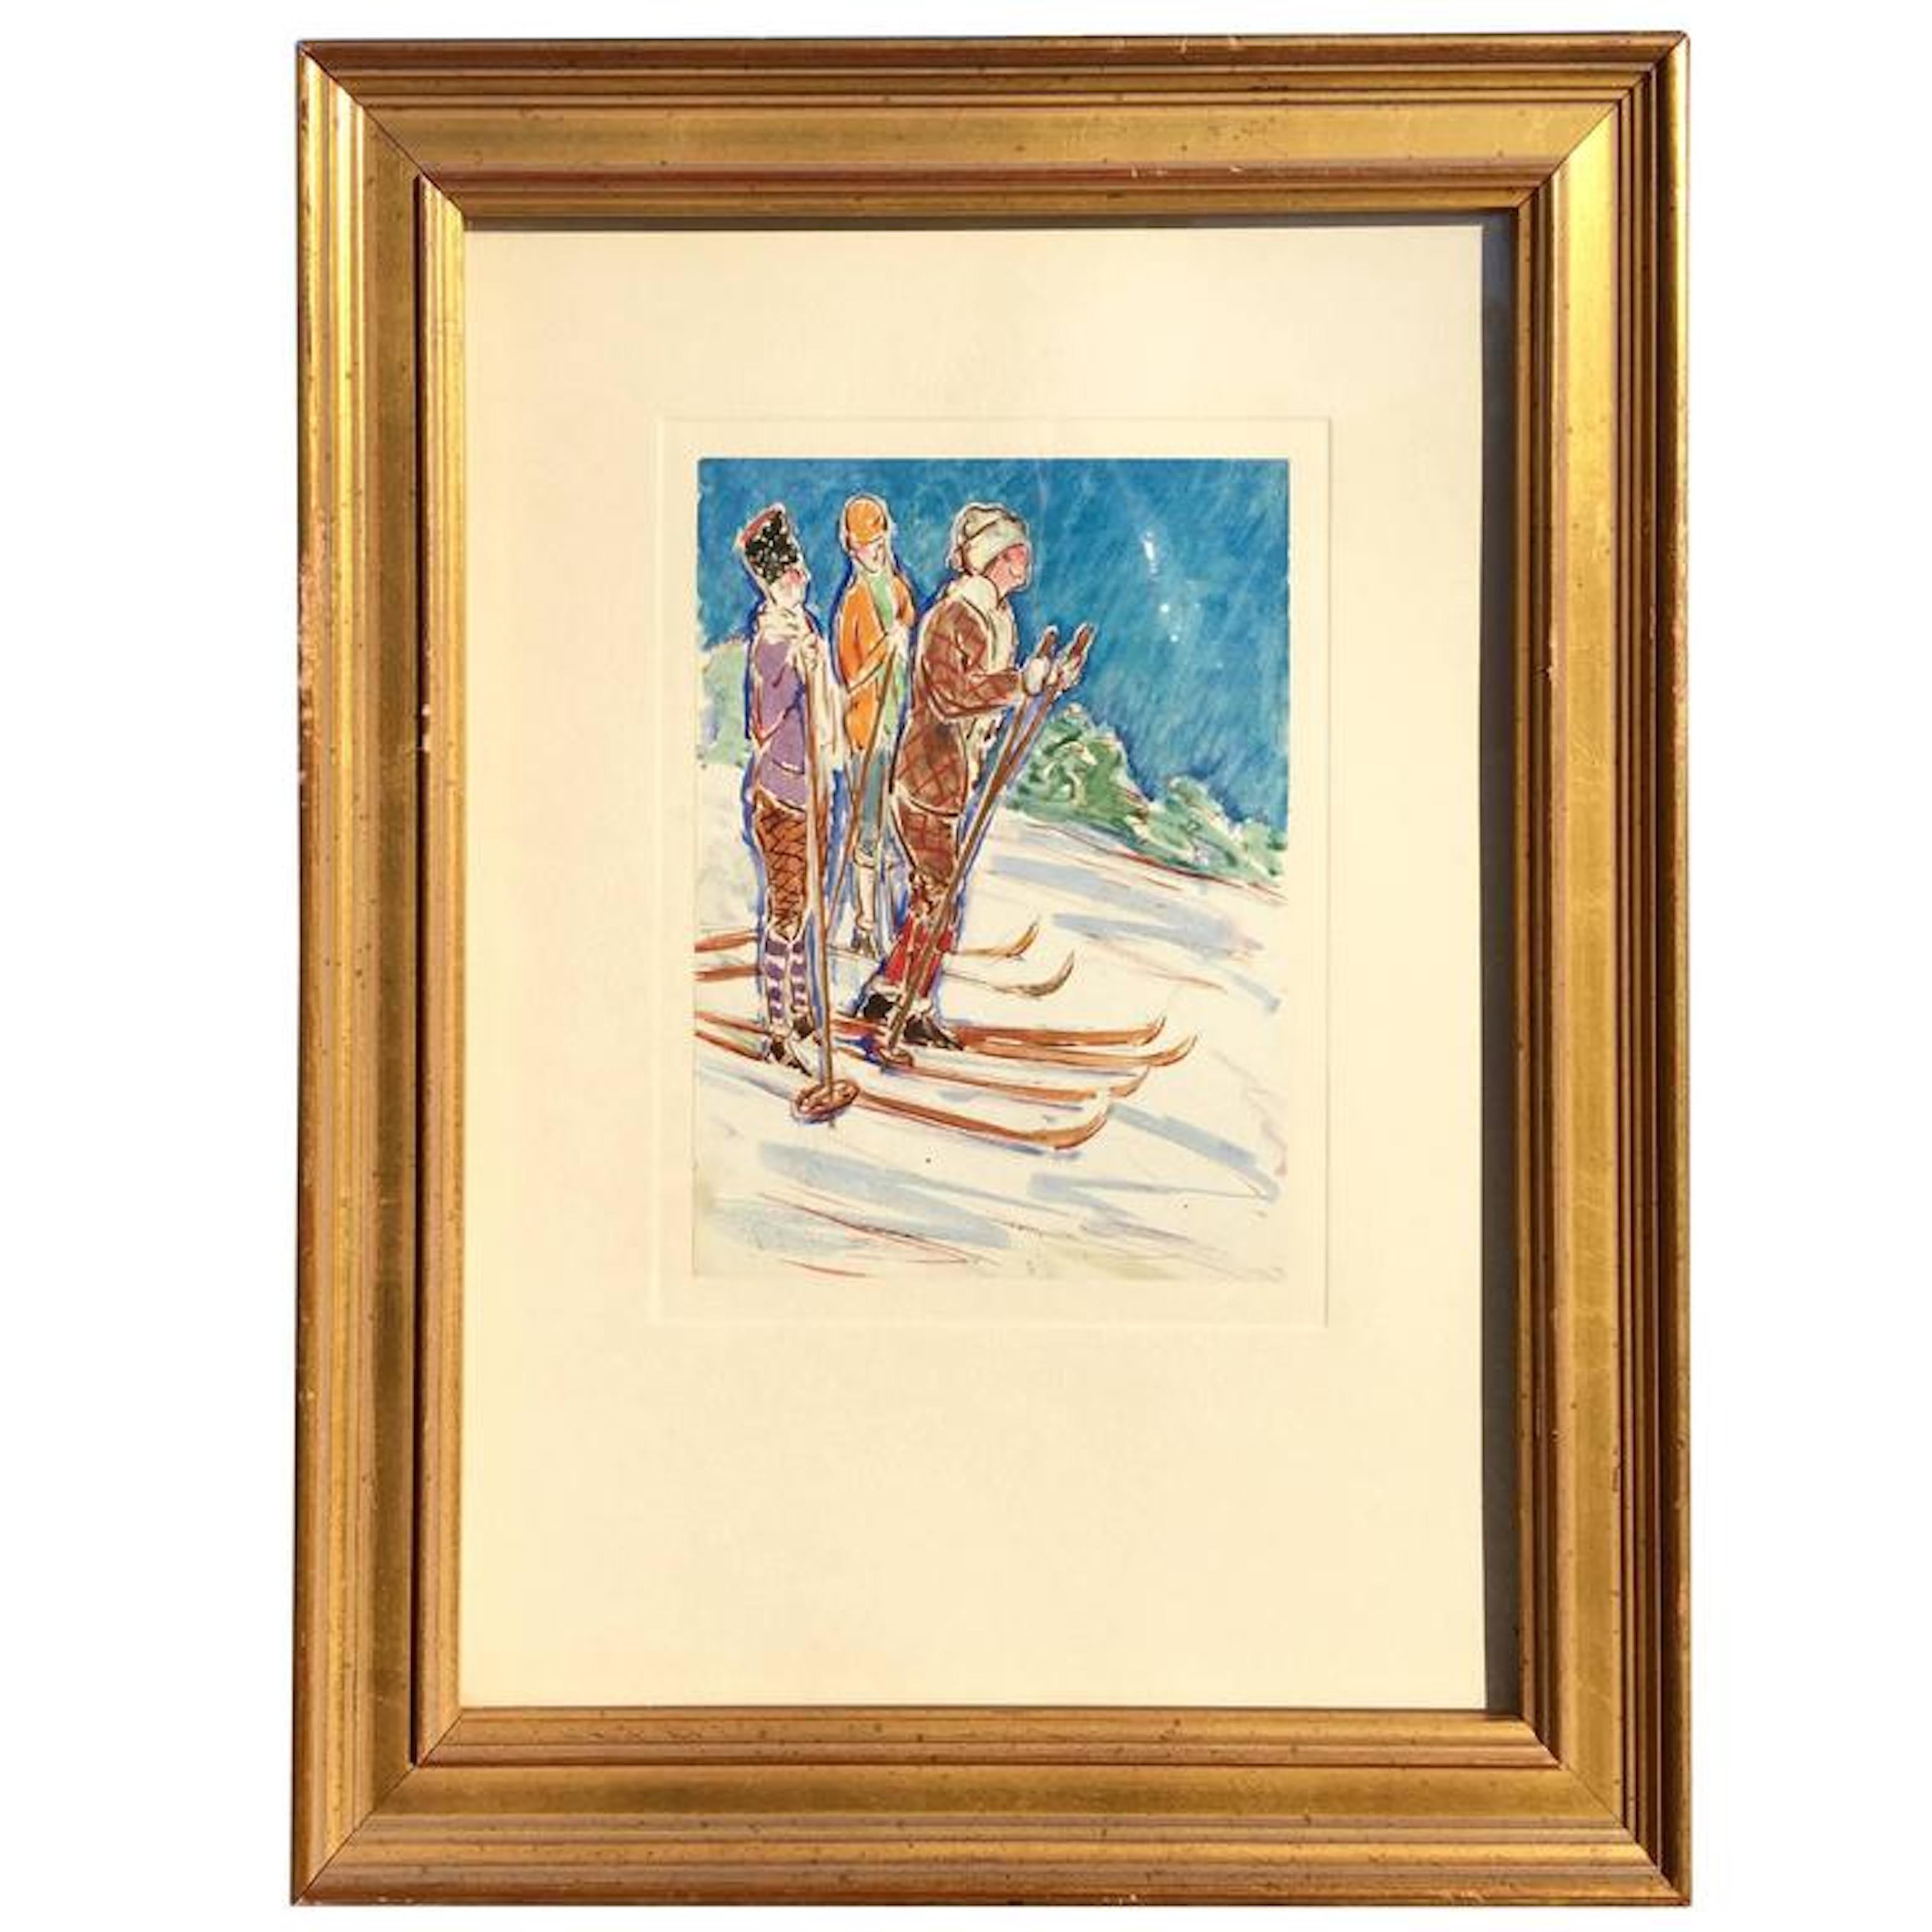 American Gouache of Skiers Early 20th Century by Rufus Dryer